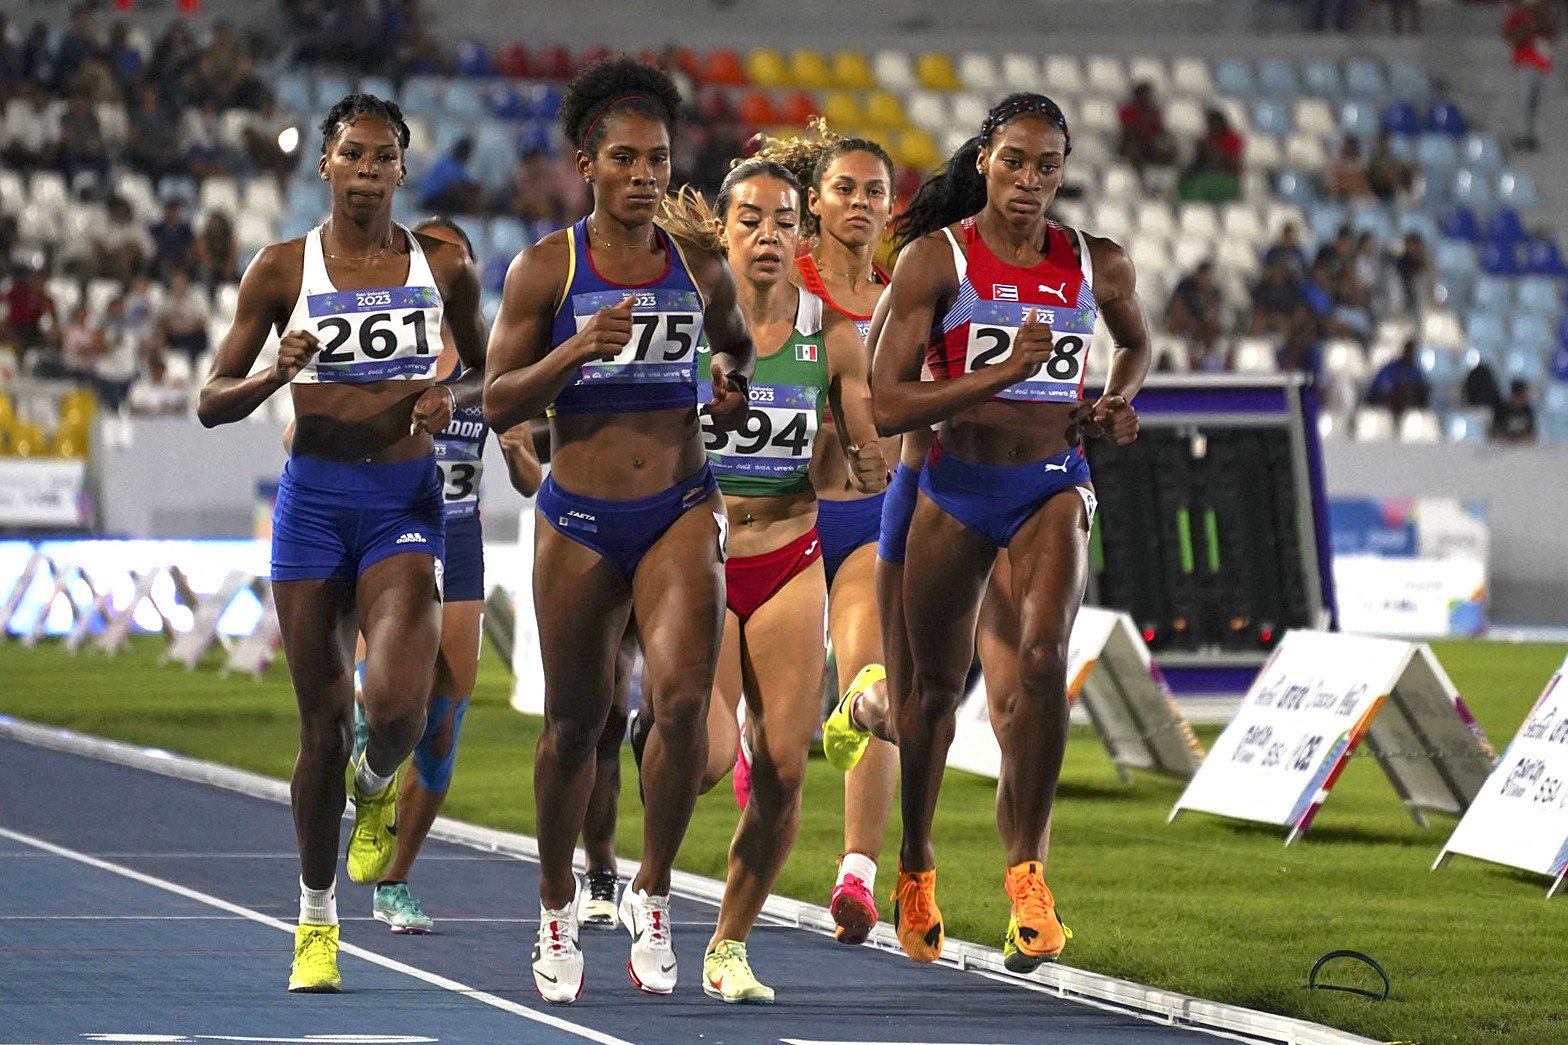 Marys Petterson of Cuba, right, won the 800m race to take heptathlon gold at the Games ©Getty Images
